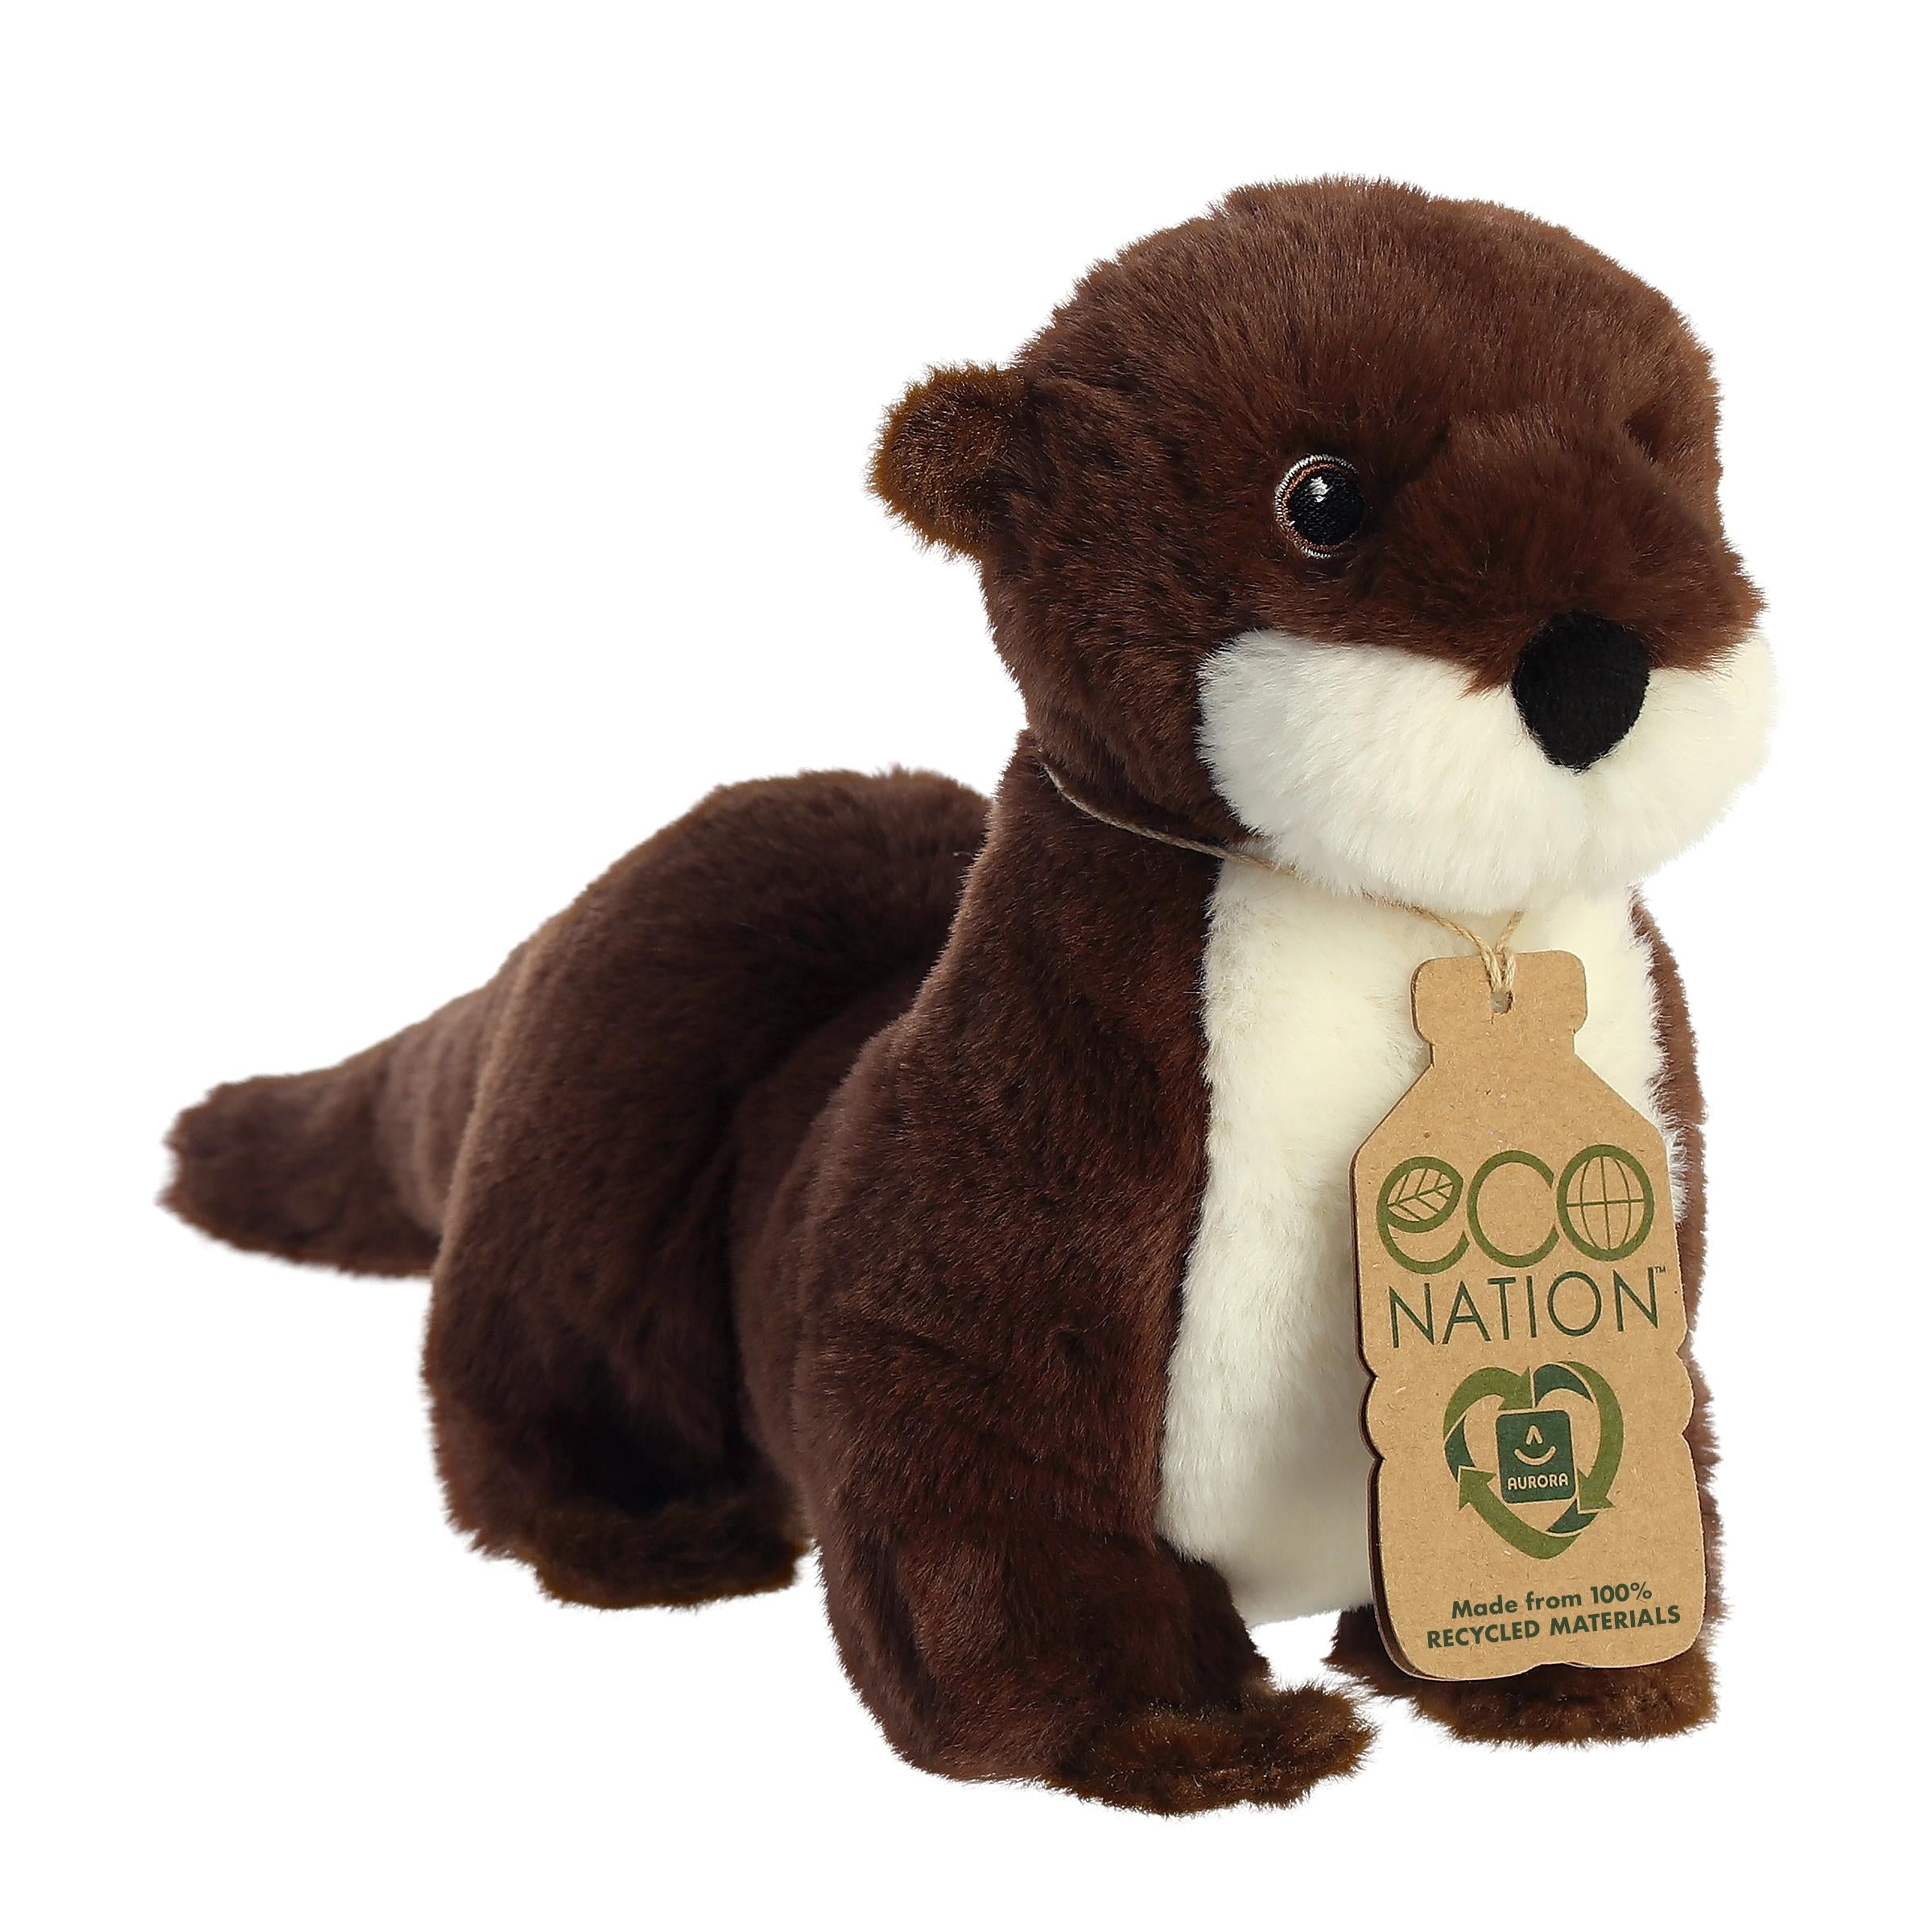 A darling river otter plush with a rich brown coat, gentle embroidered eyes, and an eco-nation tag hanging from its neck